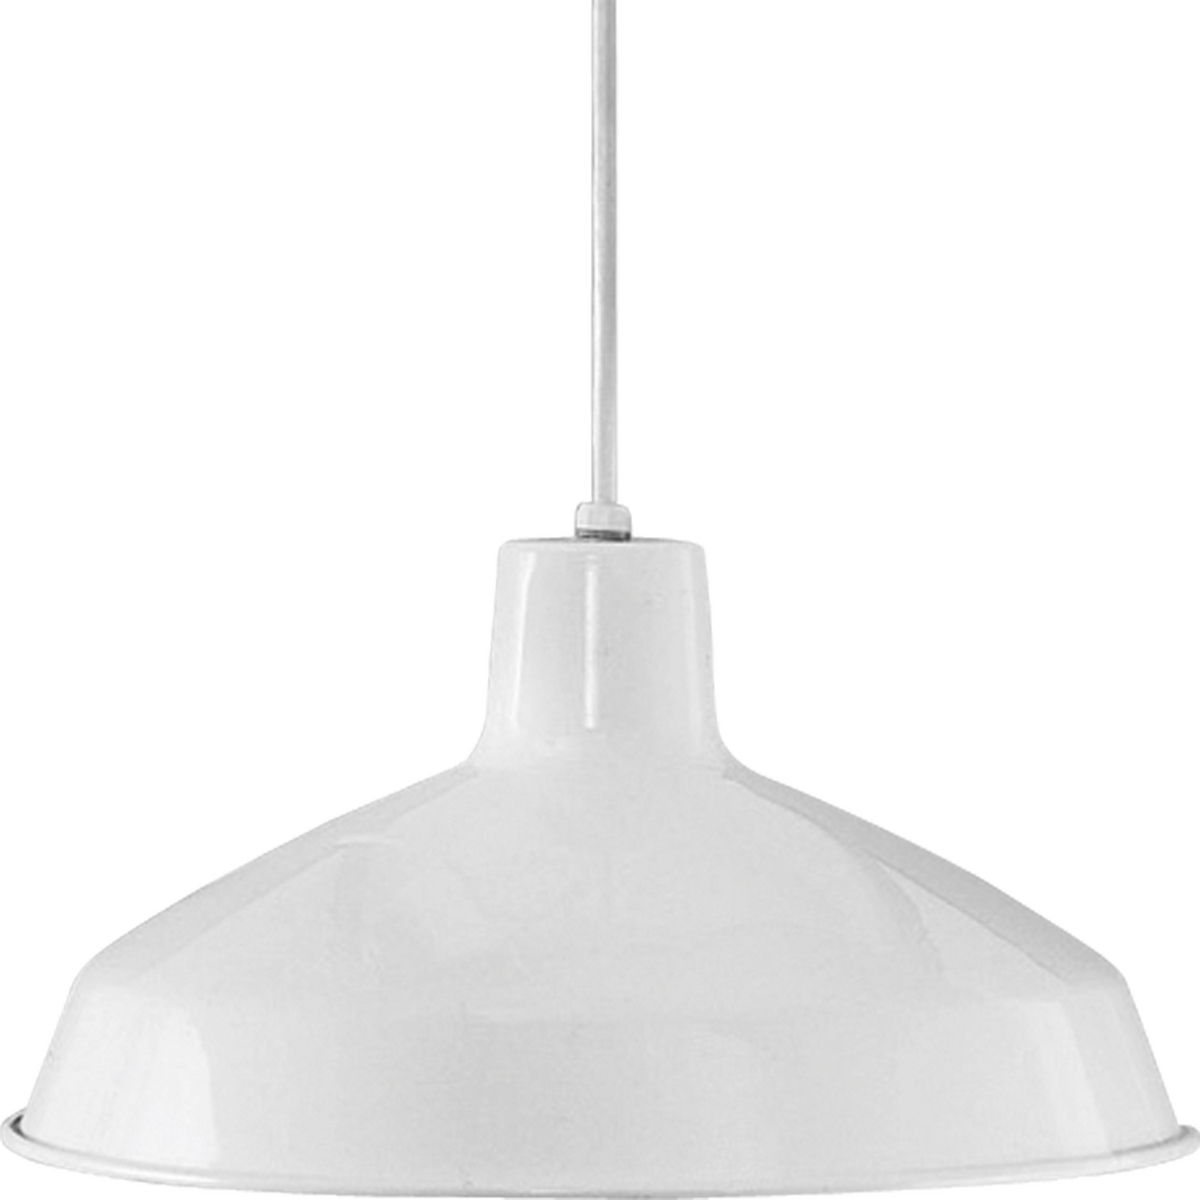 One-light industrial style warehouse cord-hung pendant with spun metal shade. Gloss white inside shade for reflectivity. 3 Conductor SVT white cord. White finish.